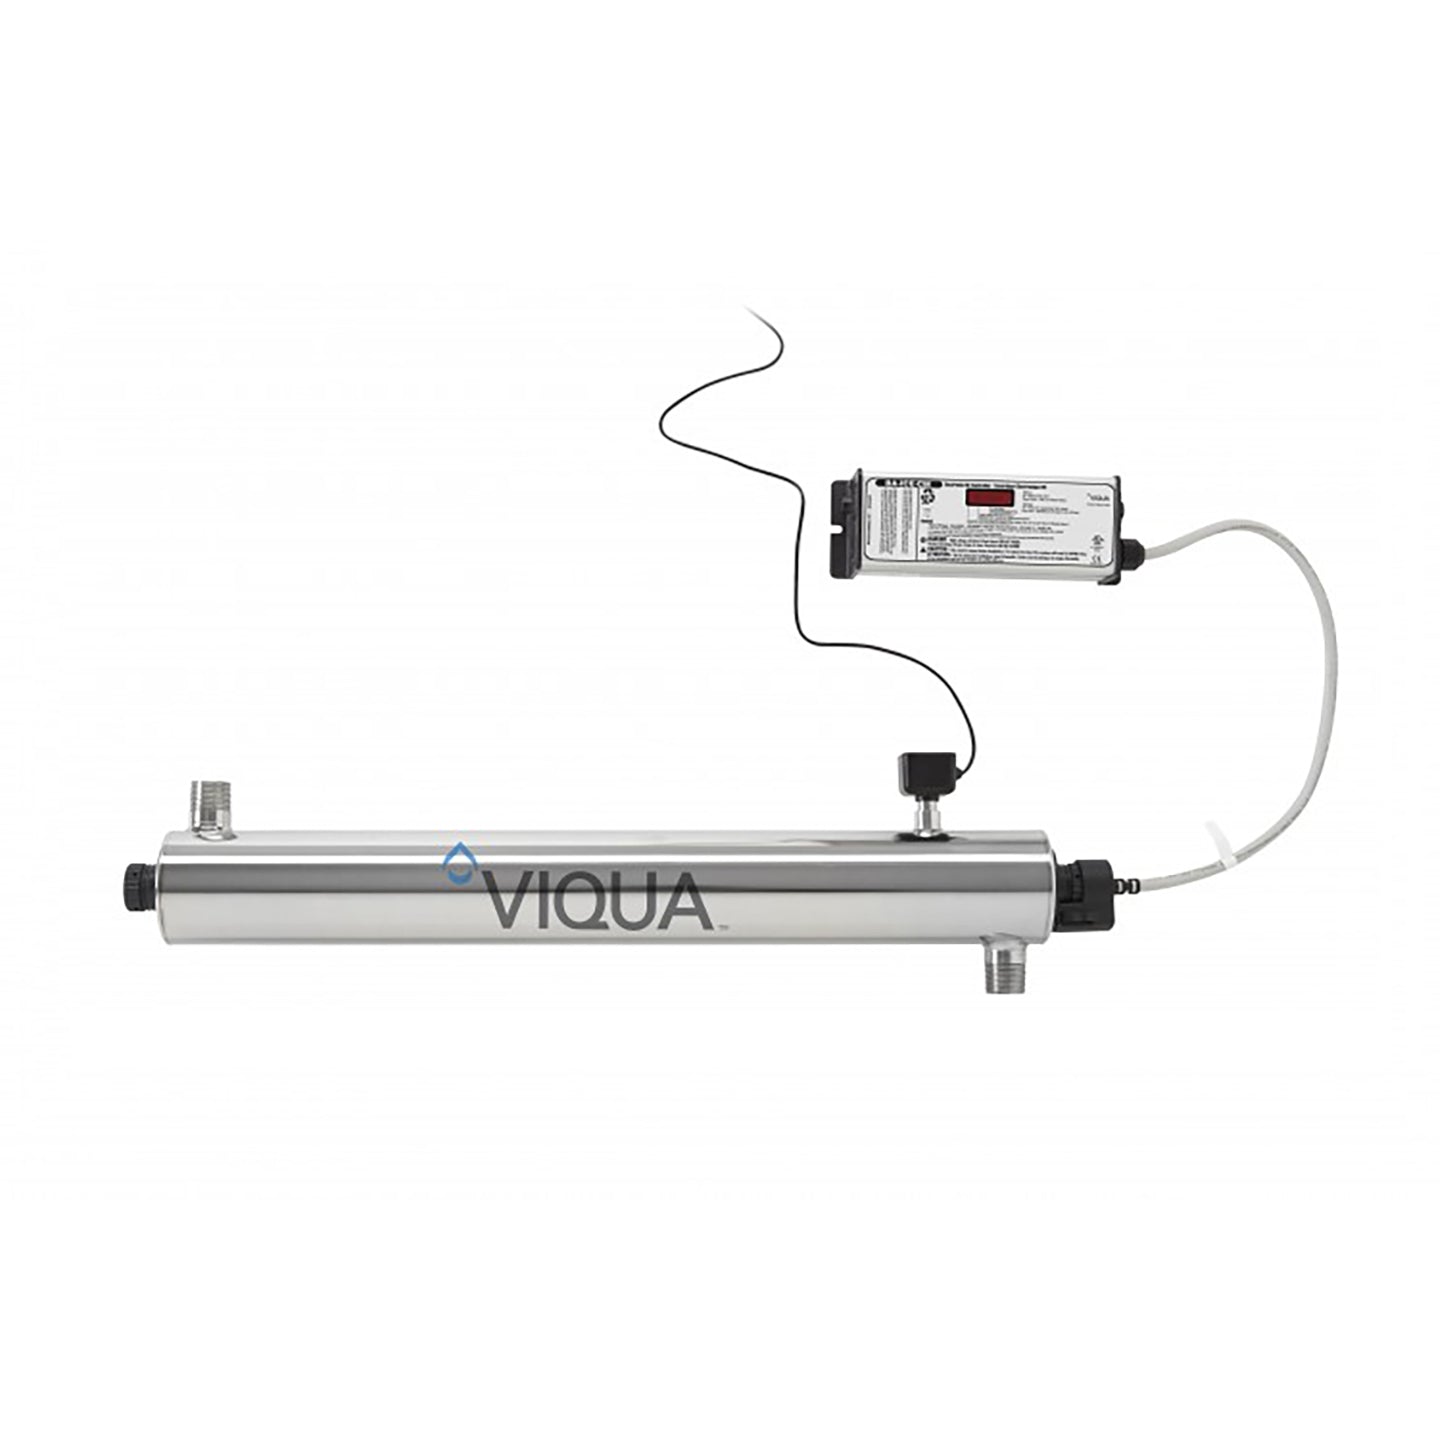 VP600M Pro.UV Water Disinfection System by Viqua (Horizontal)